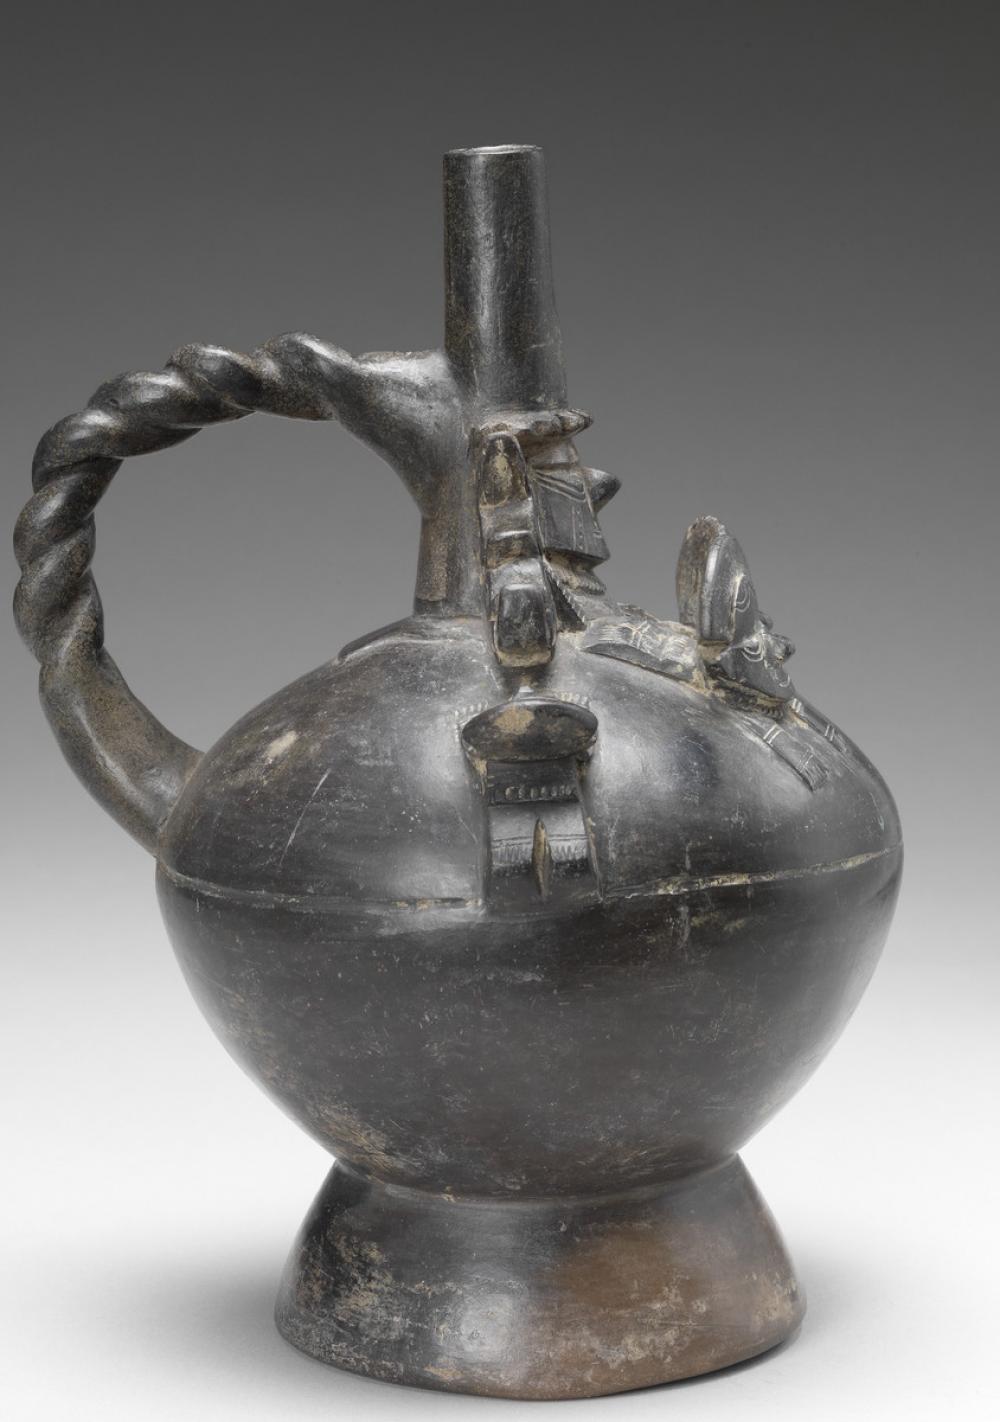 Lambayeque, Stirrup-spouted blackware vessel with Lambayeque Lord